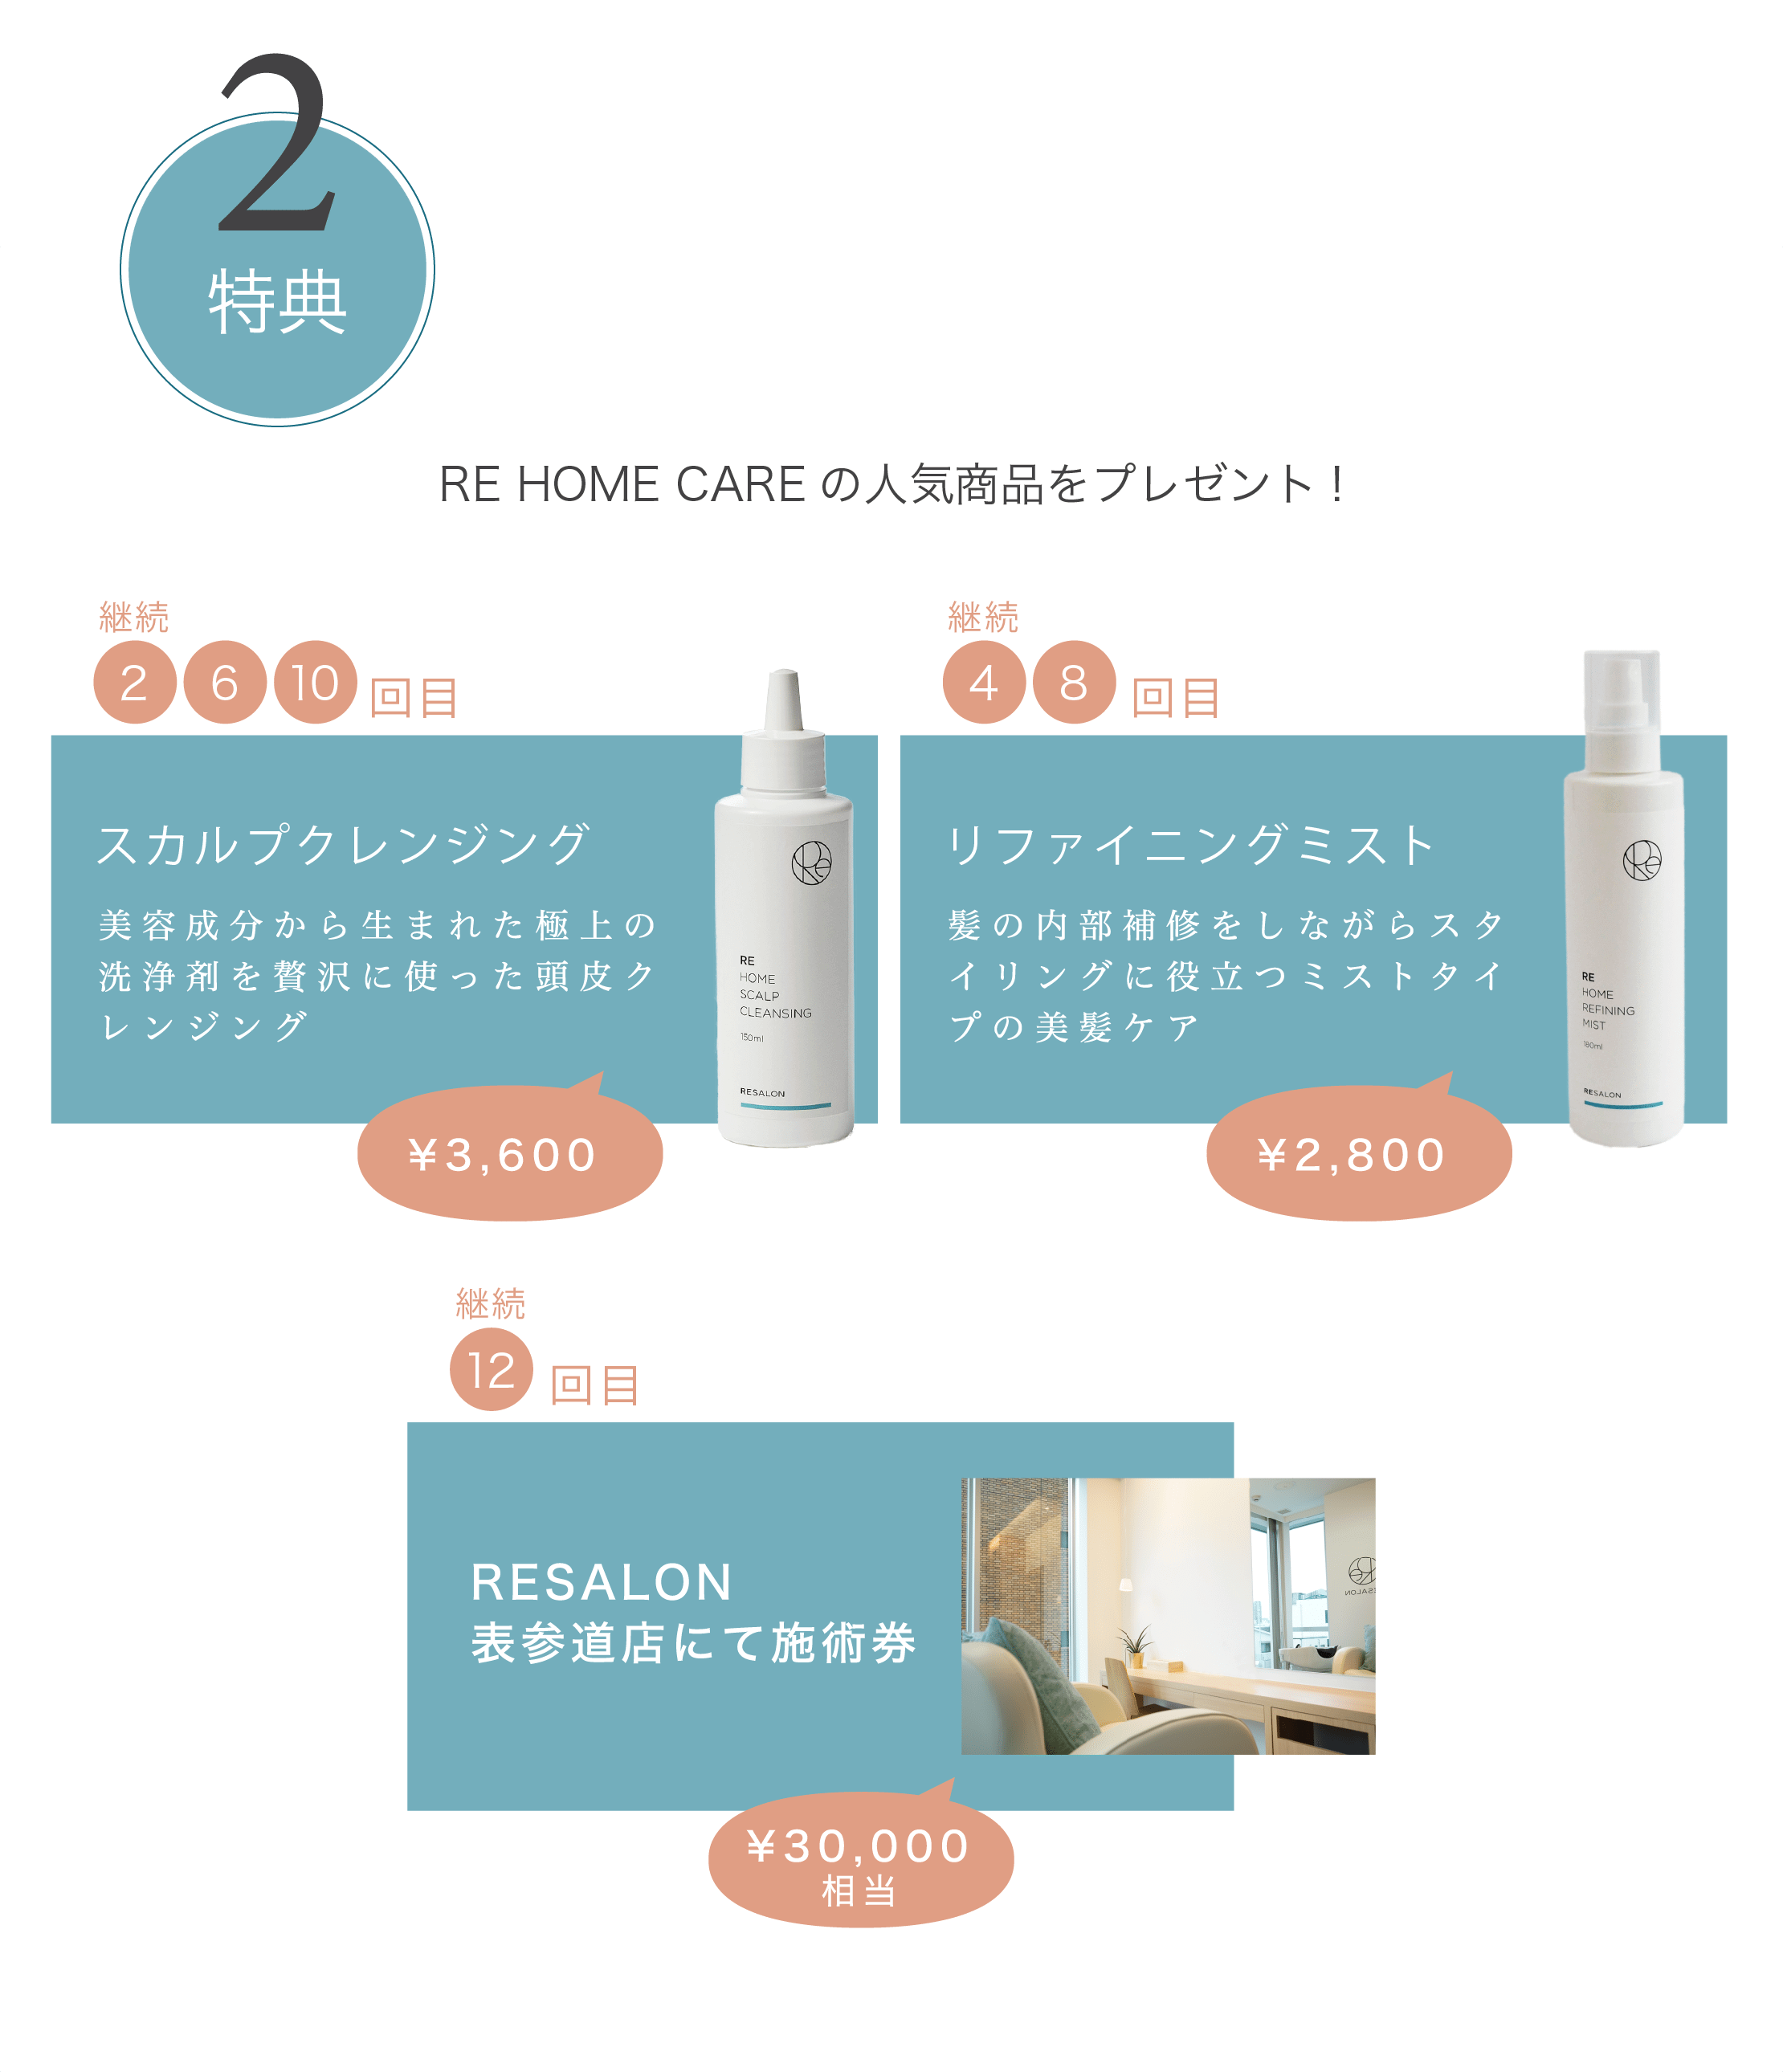 RE HOME CAREの人気商品をプレゼント！